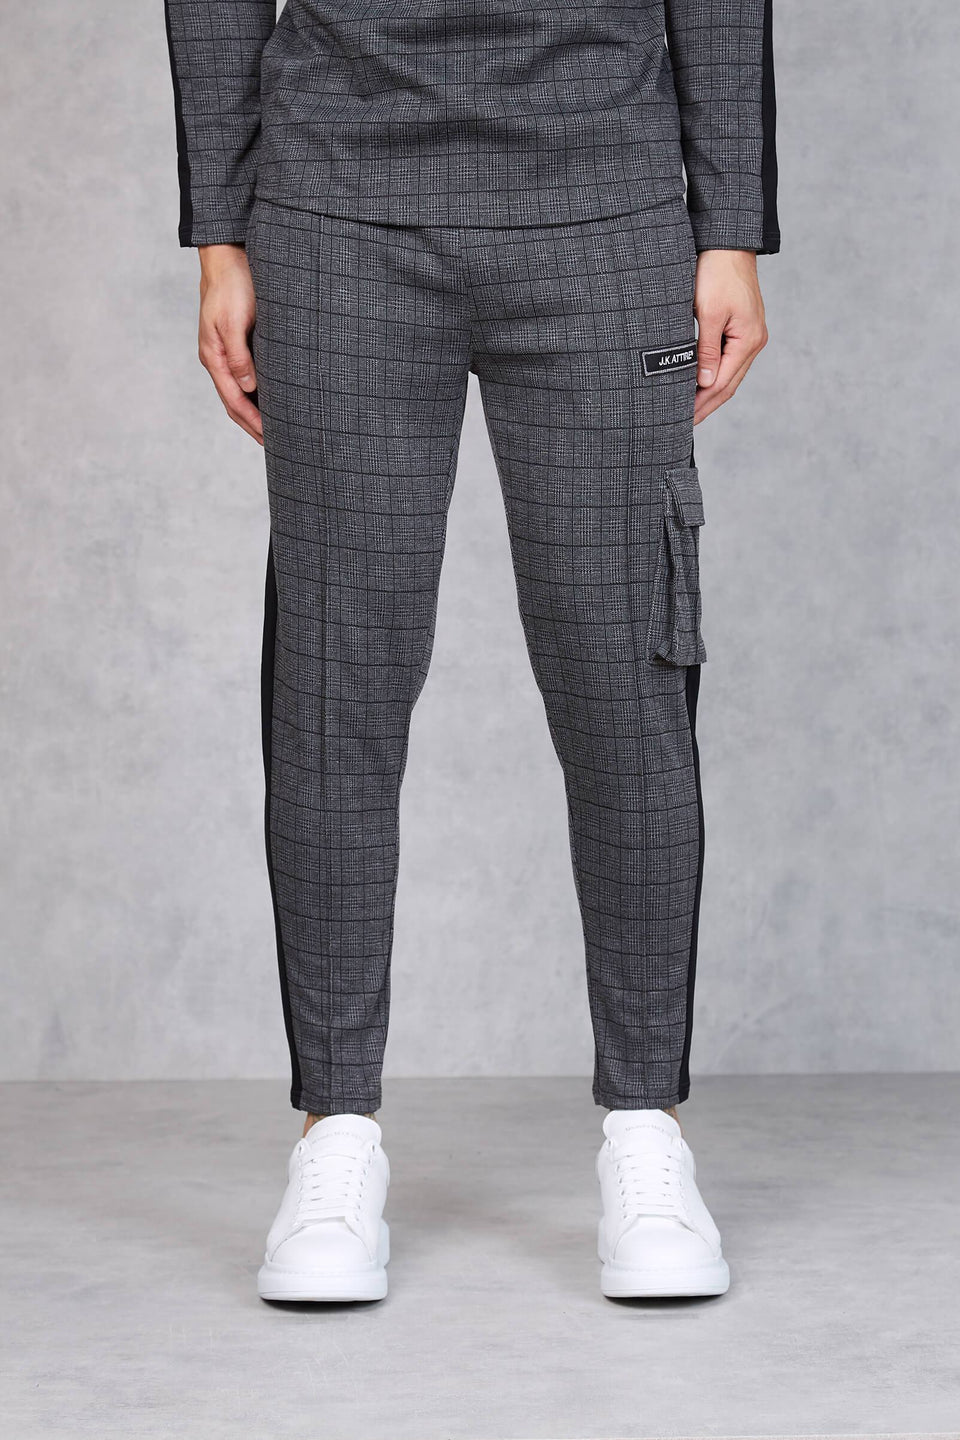 Nonstop Check Cropped Trouser